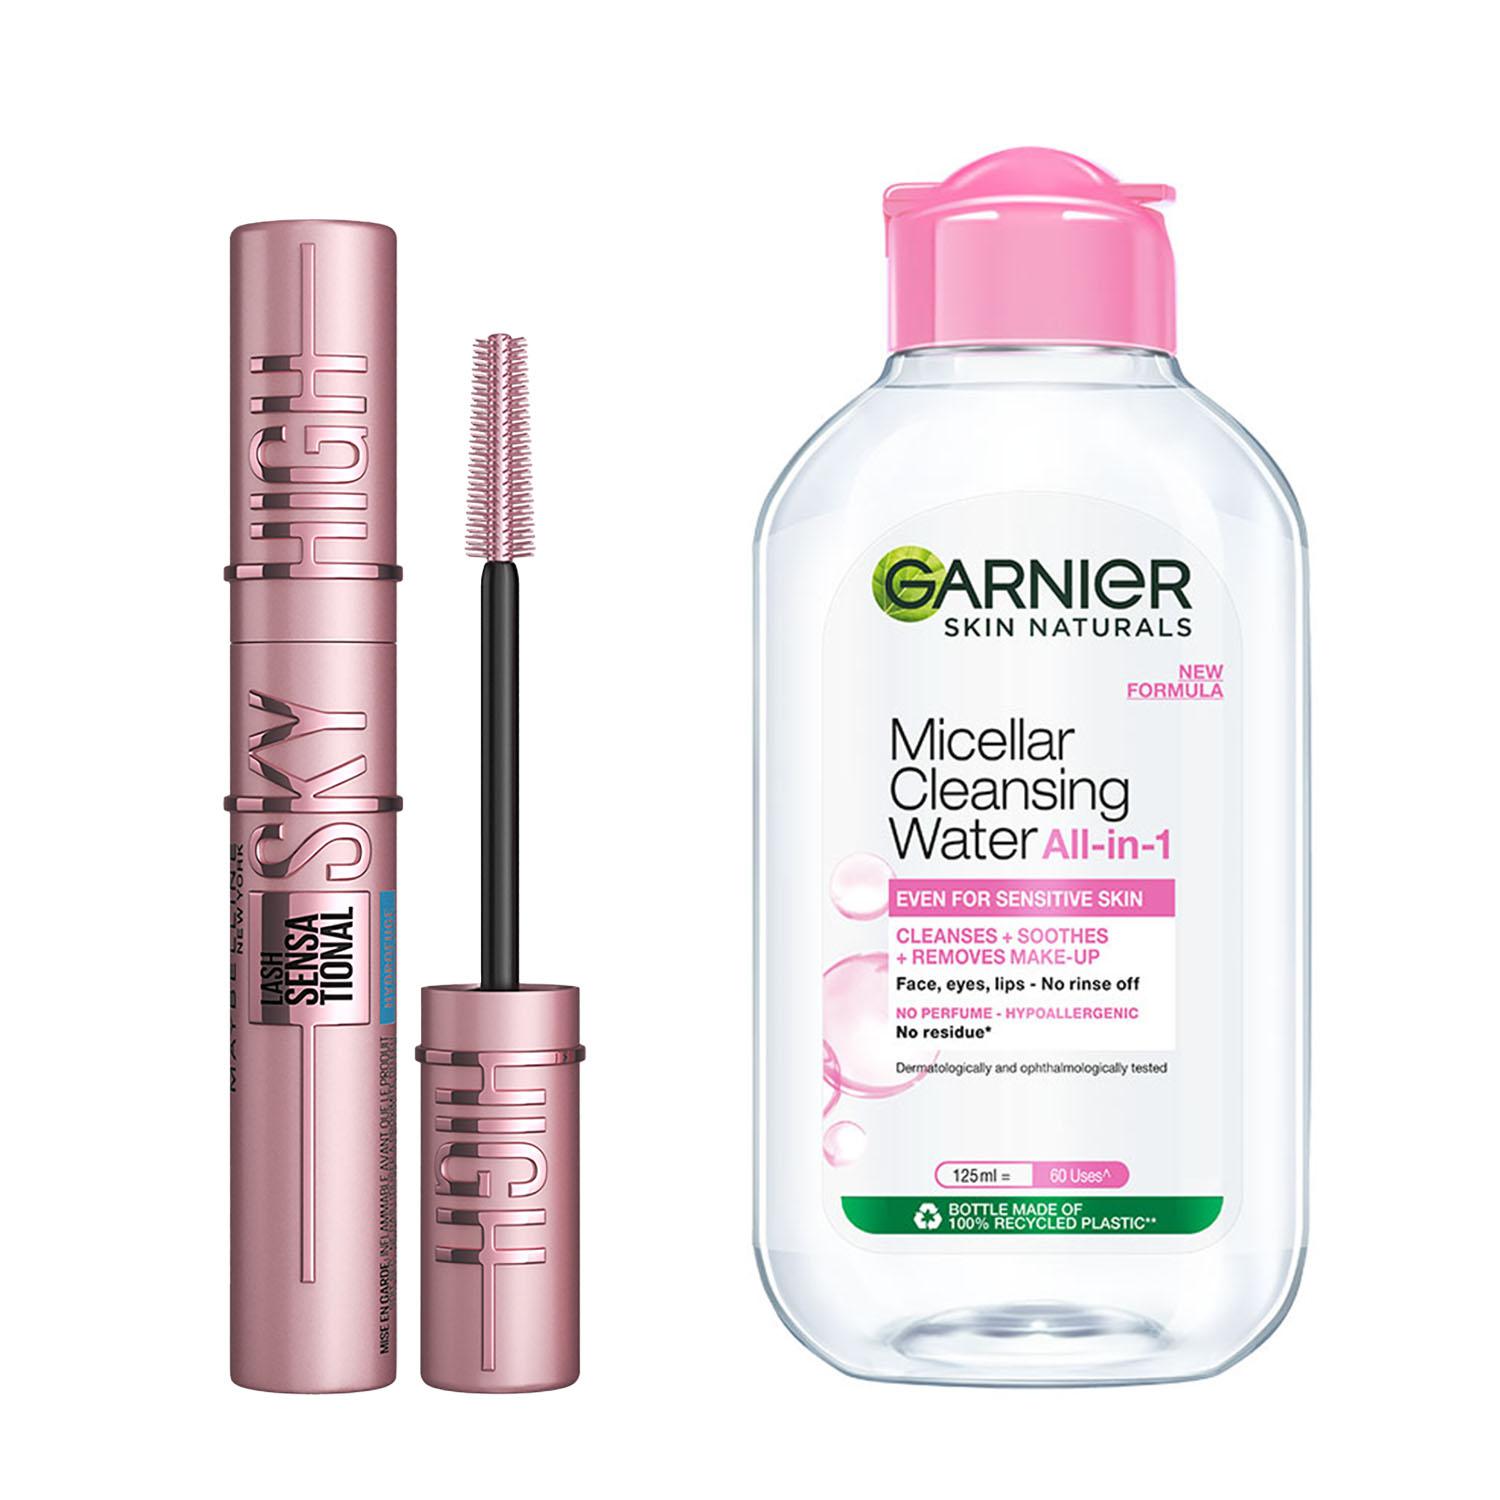 Maybelline New York | Maybelline New York Sky High Waterproof Mascara with Garnier Micellar Cleansing Water Combo